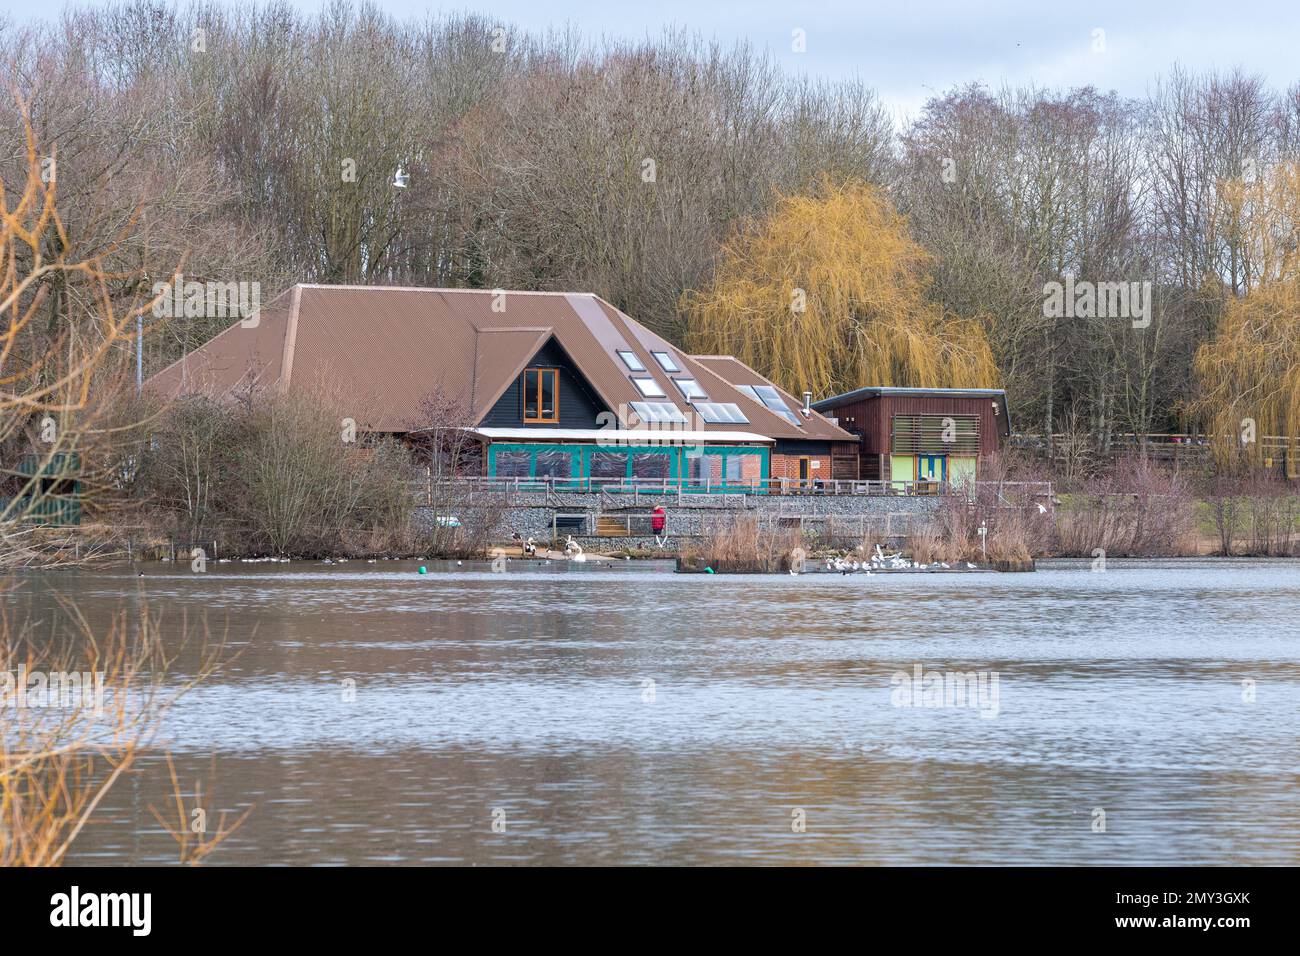 Thatcham Nature Discovery Centre, Berkshire, England, UK during February or winter, view across the lake with wildfowl Stock Photo